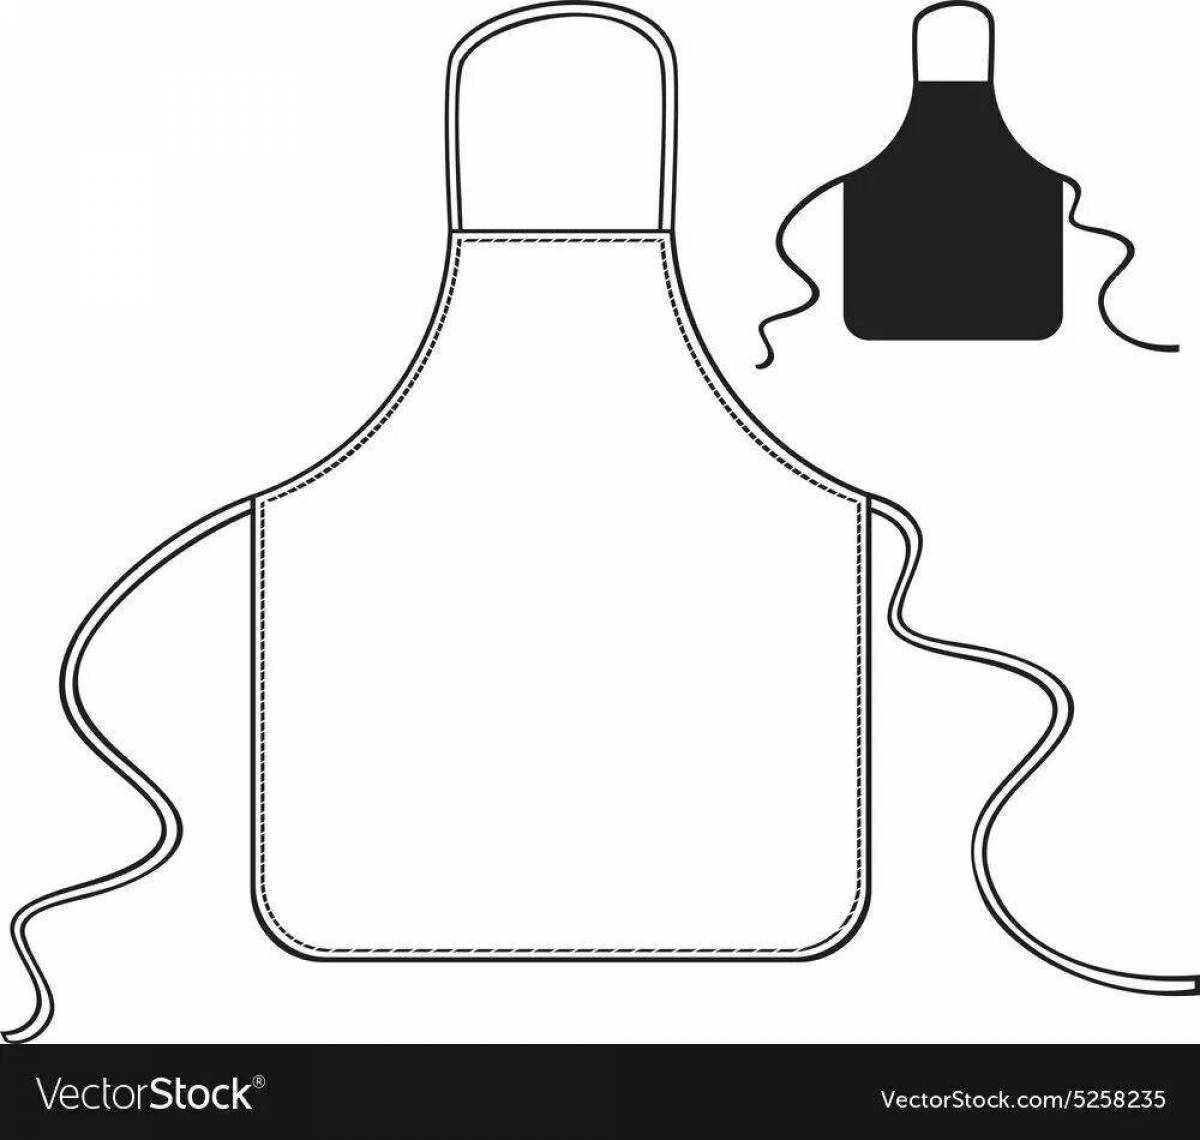 Creative apron coloring for kids